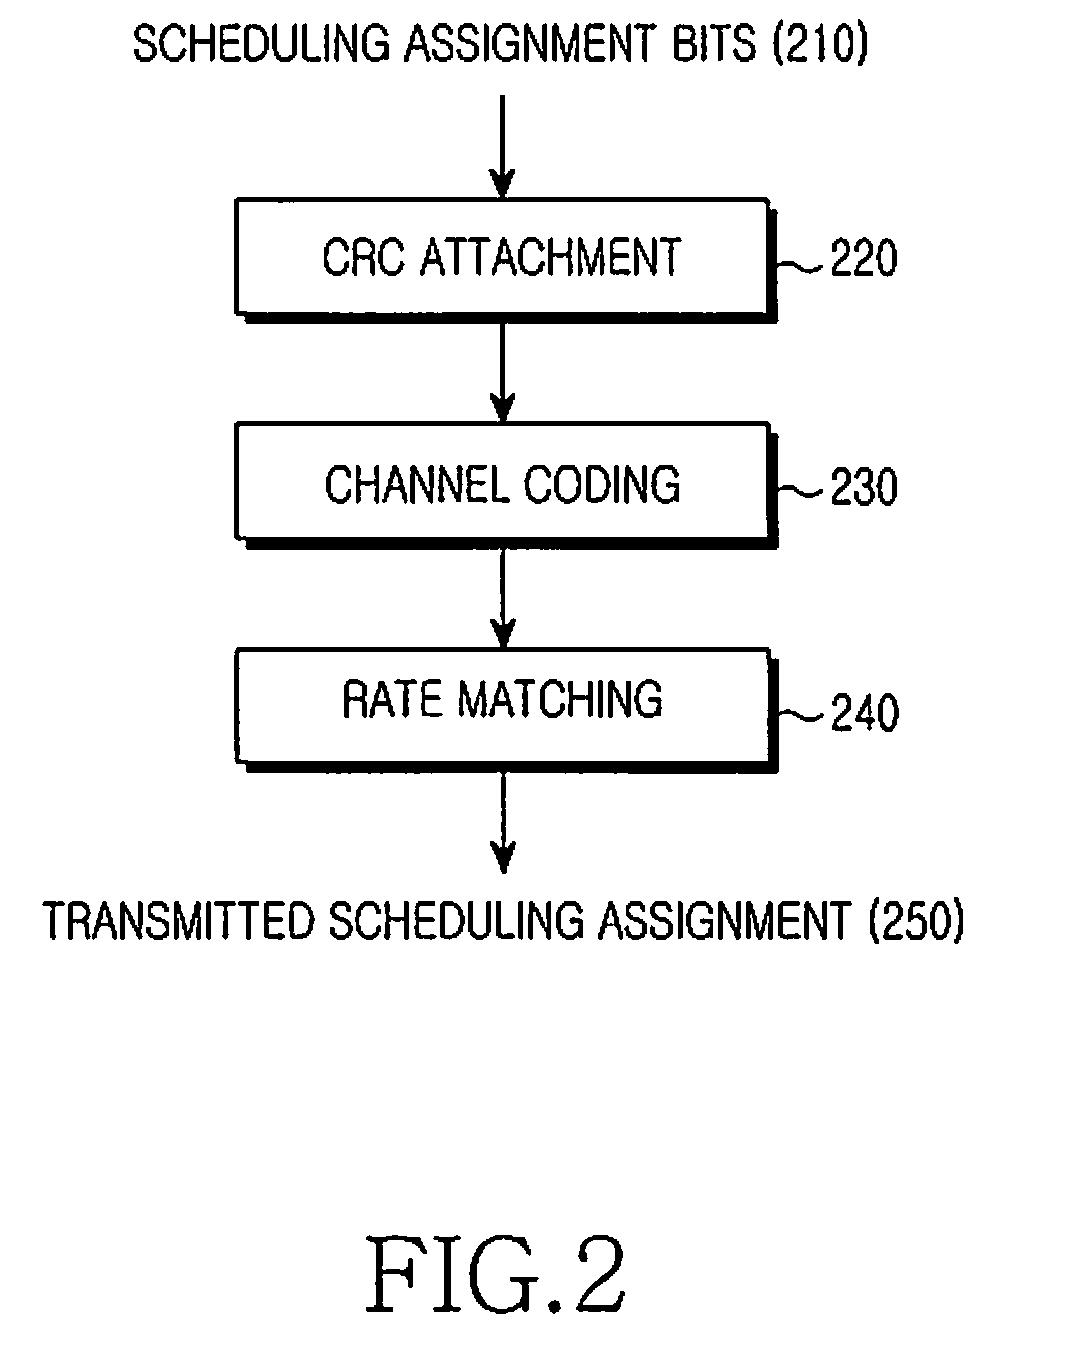 Transmission of scheduling assignments in multiple operating bandwidths